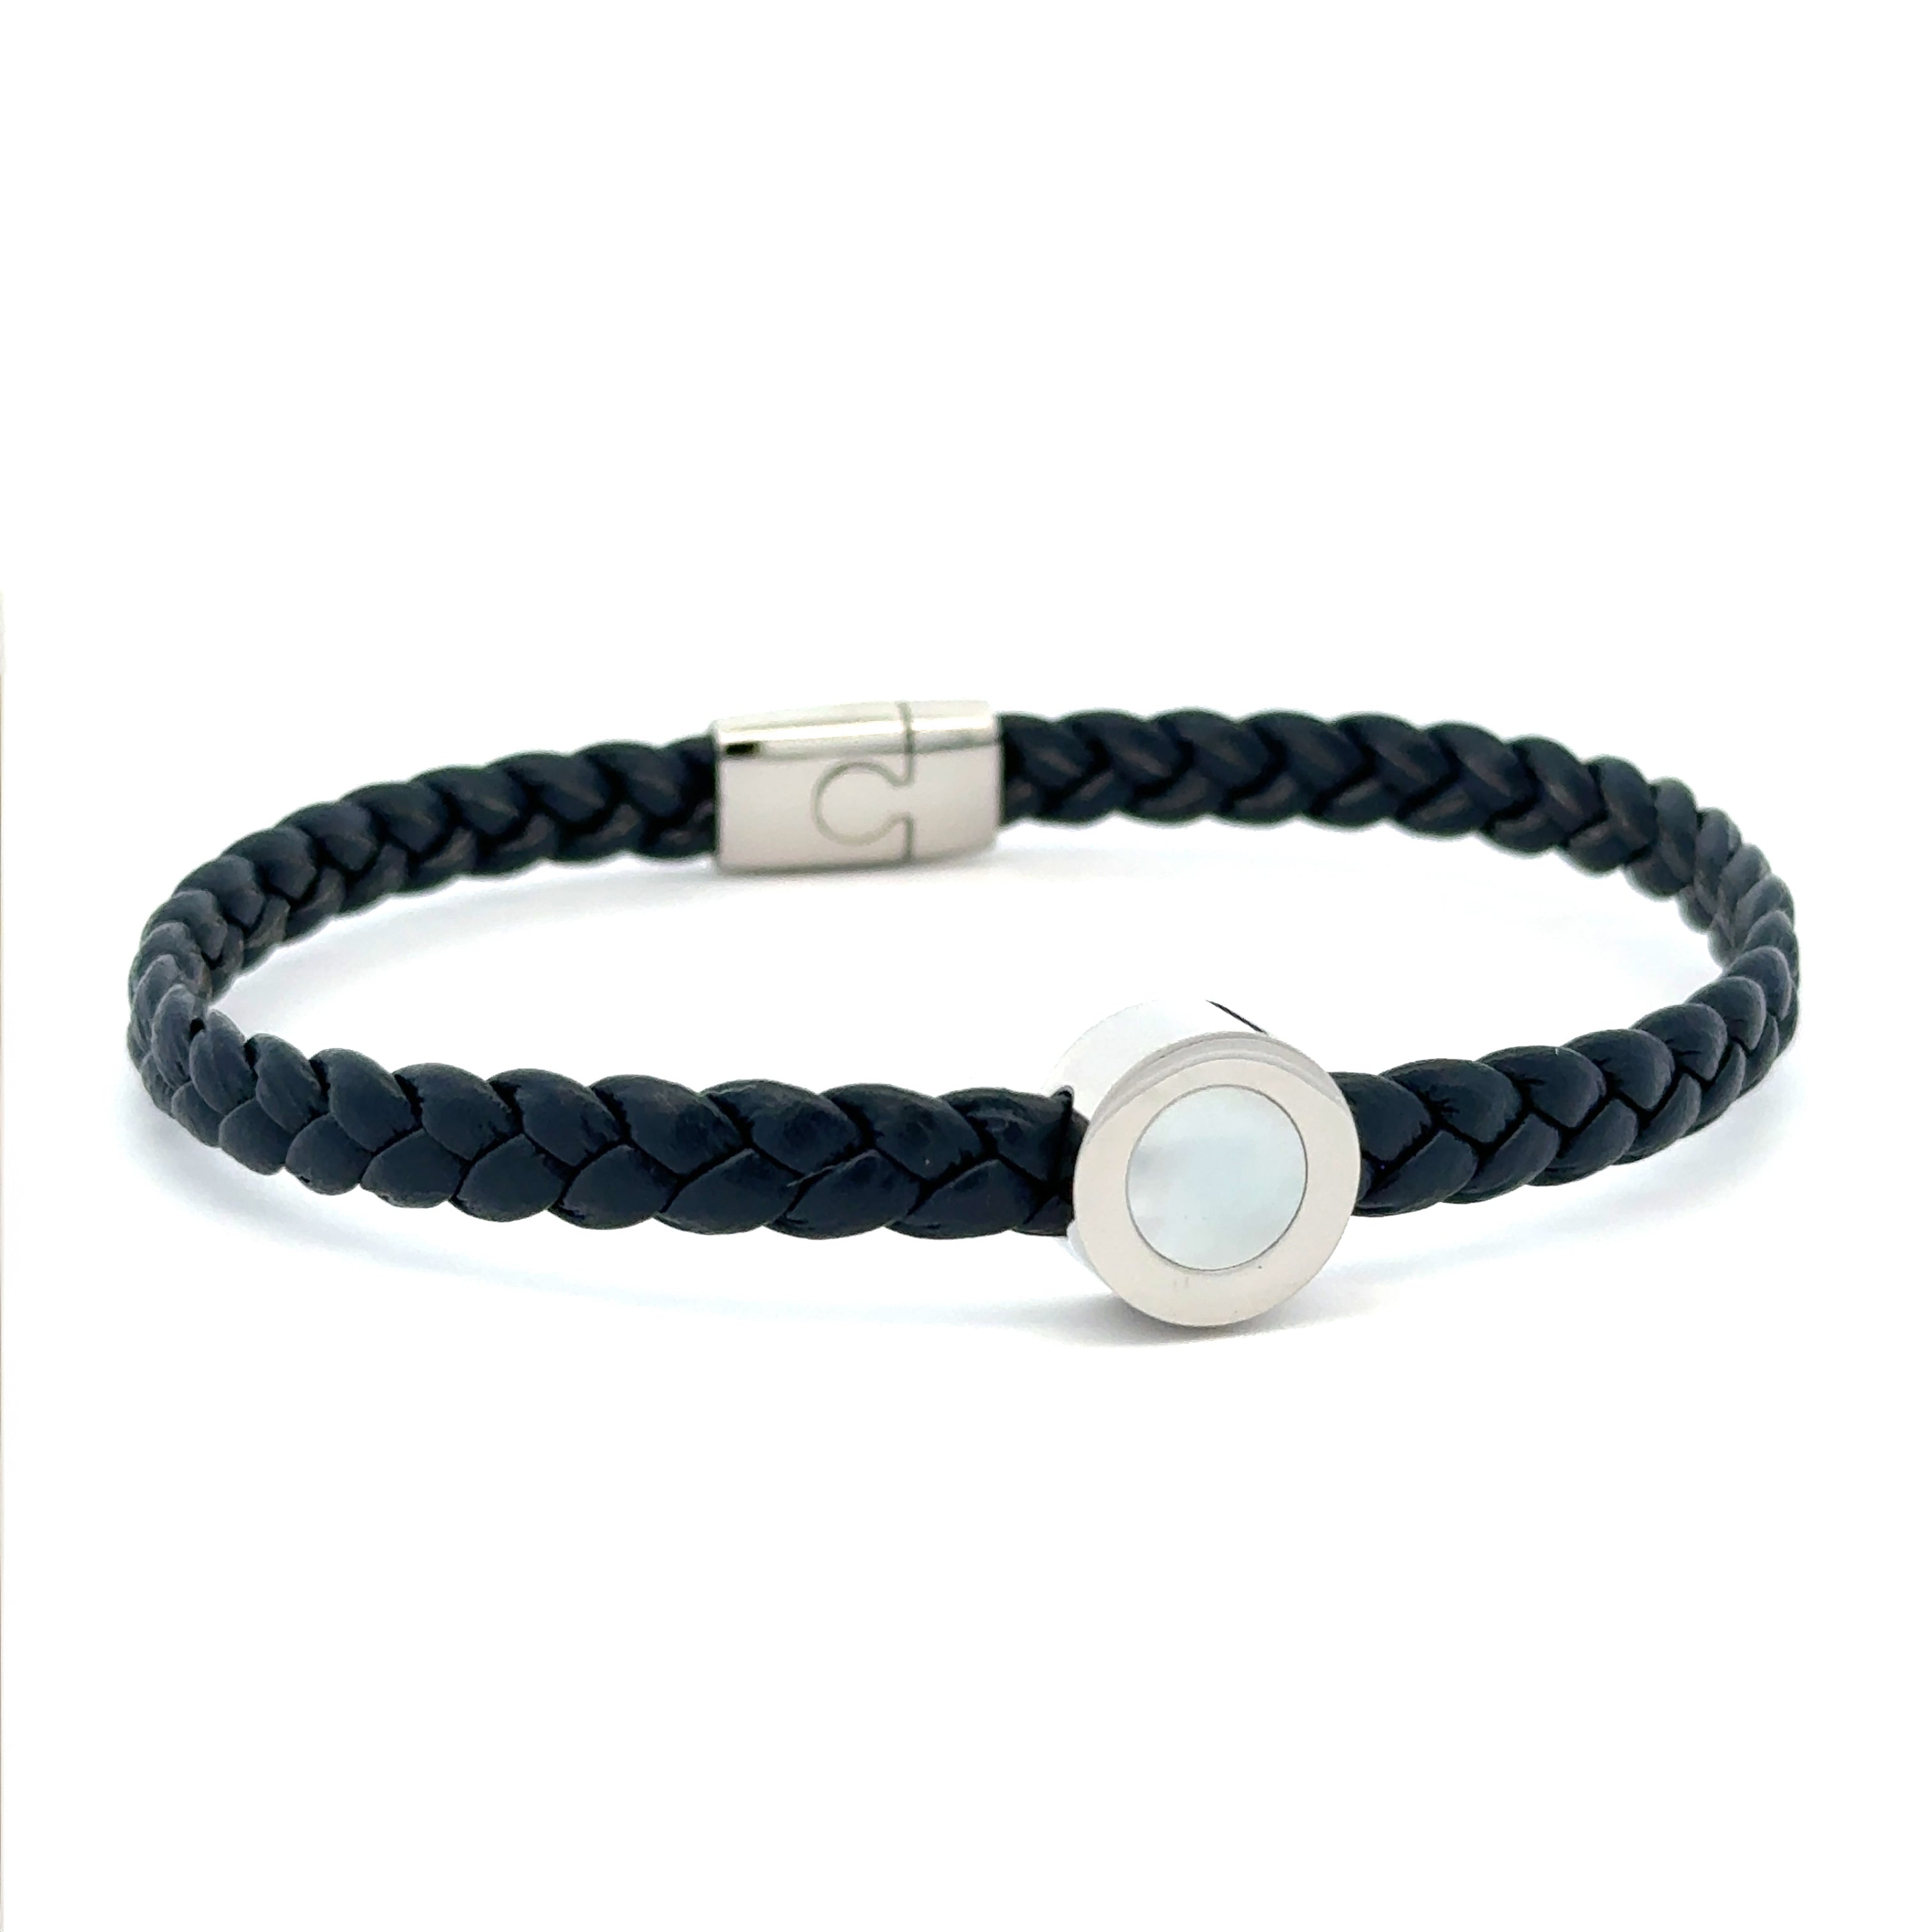 Stainless Steel Braided Blue Leather Bracelet with White Mother of Pearl